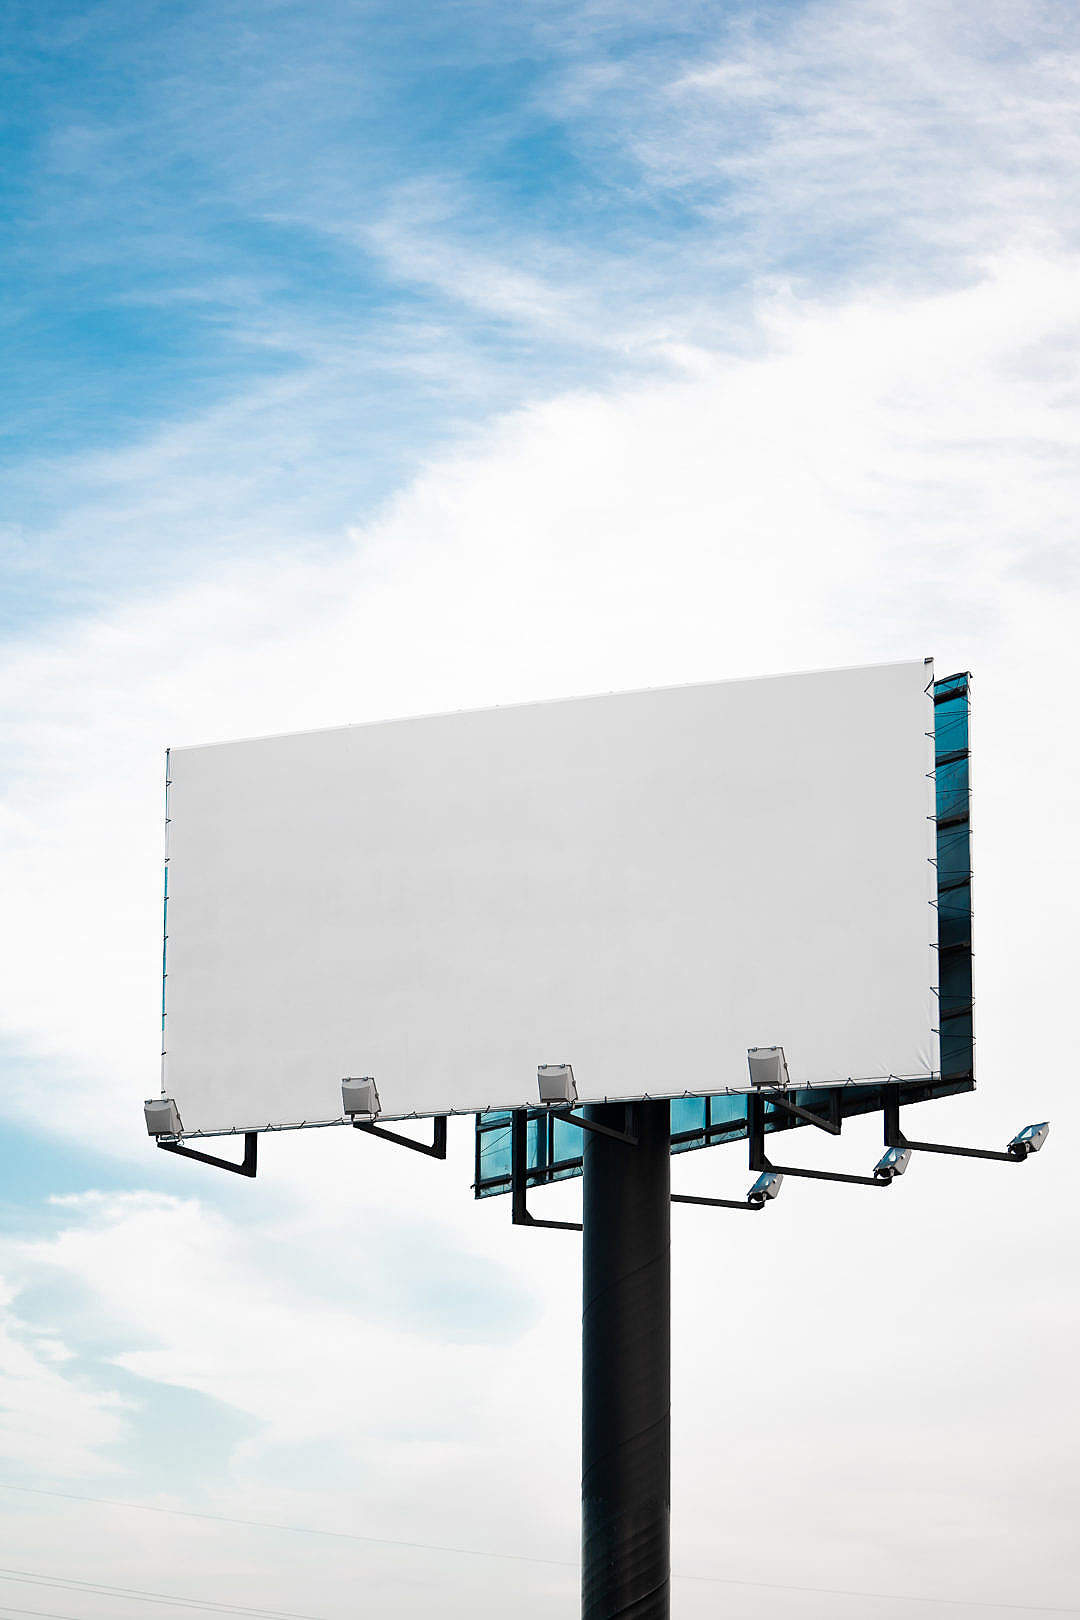 Blank Billboard For Advertising With Cloudy Sky Background